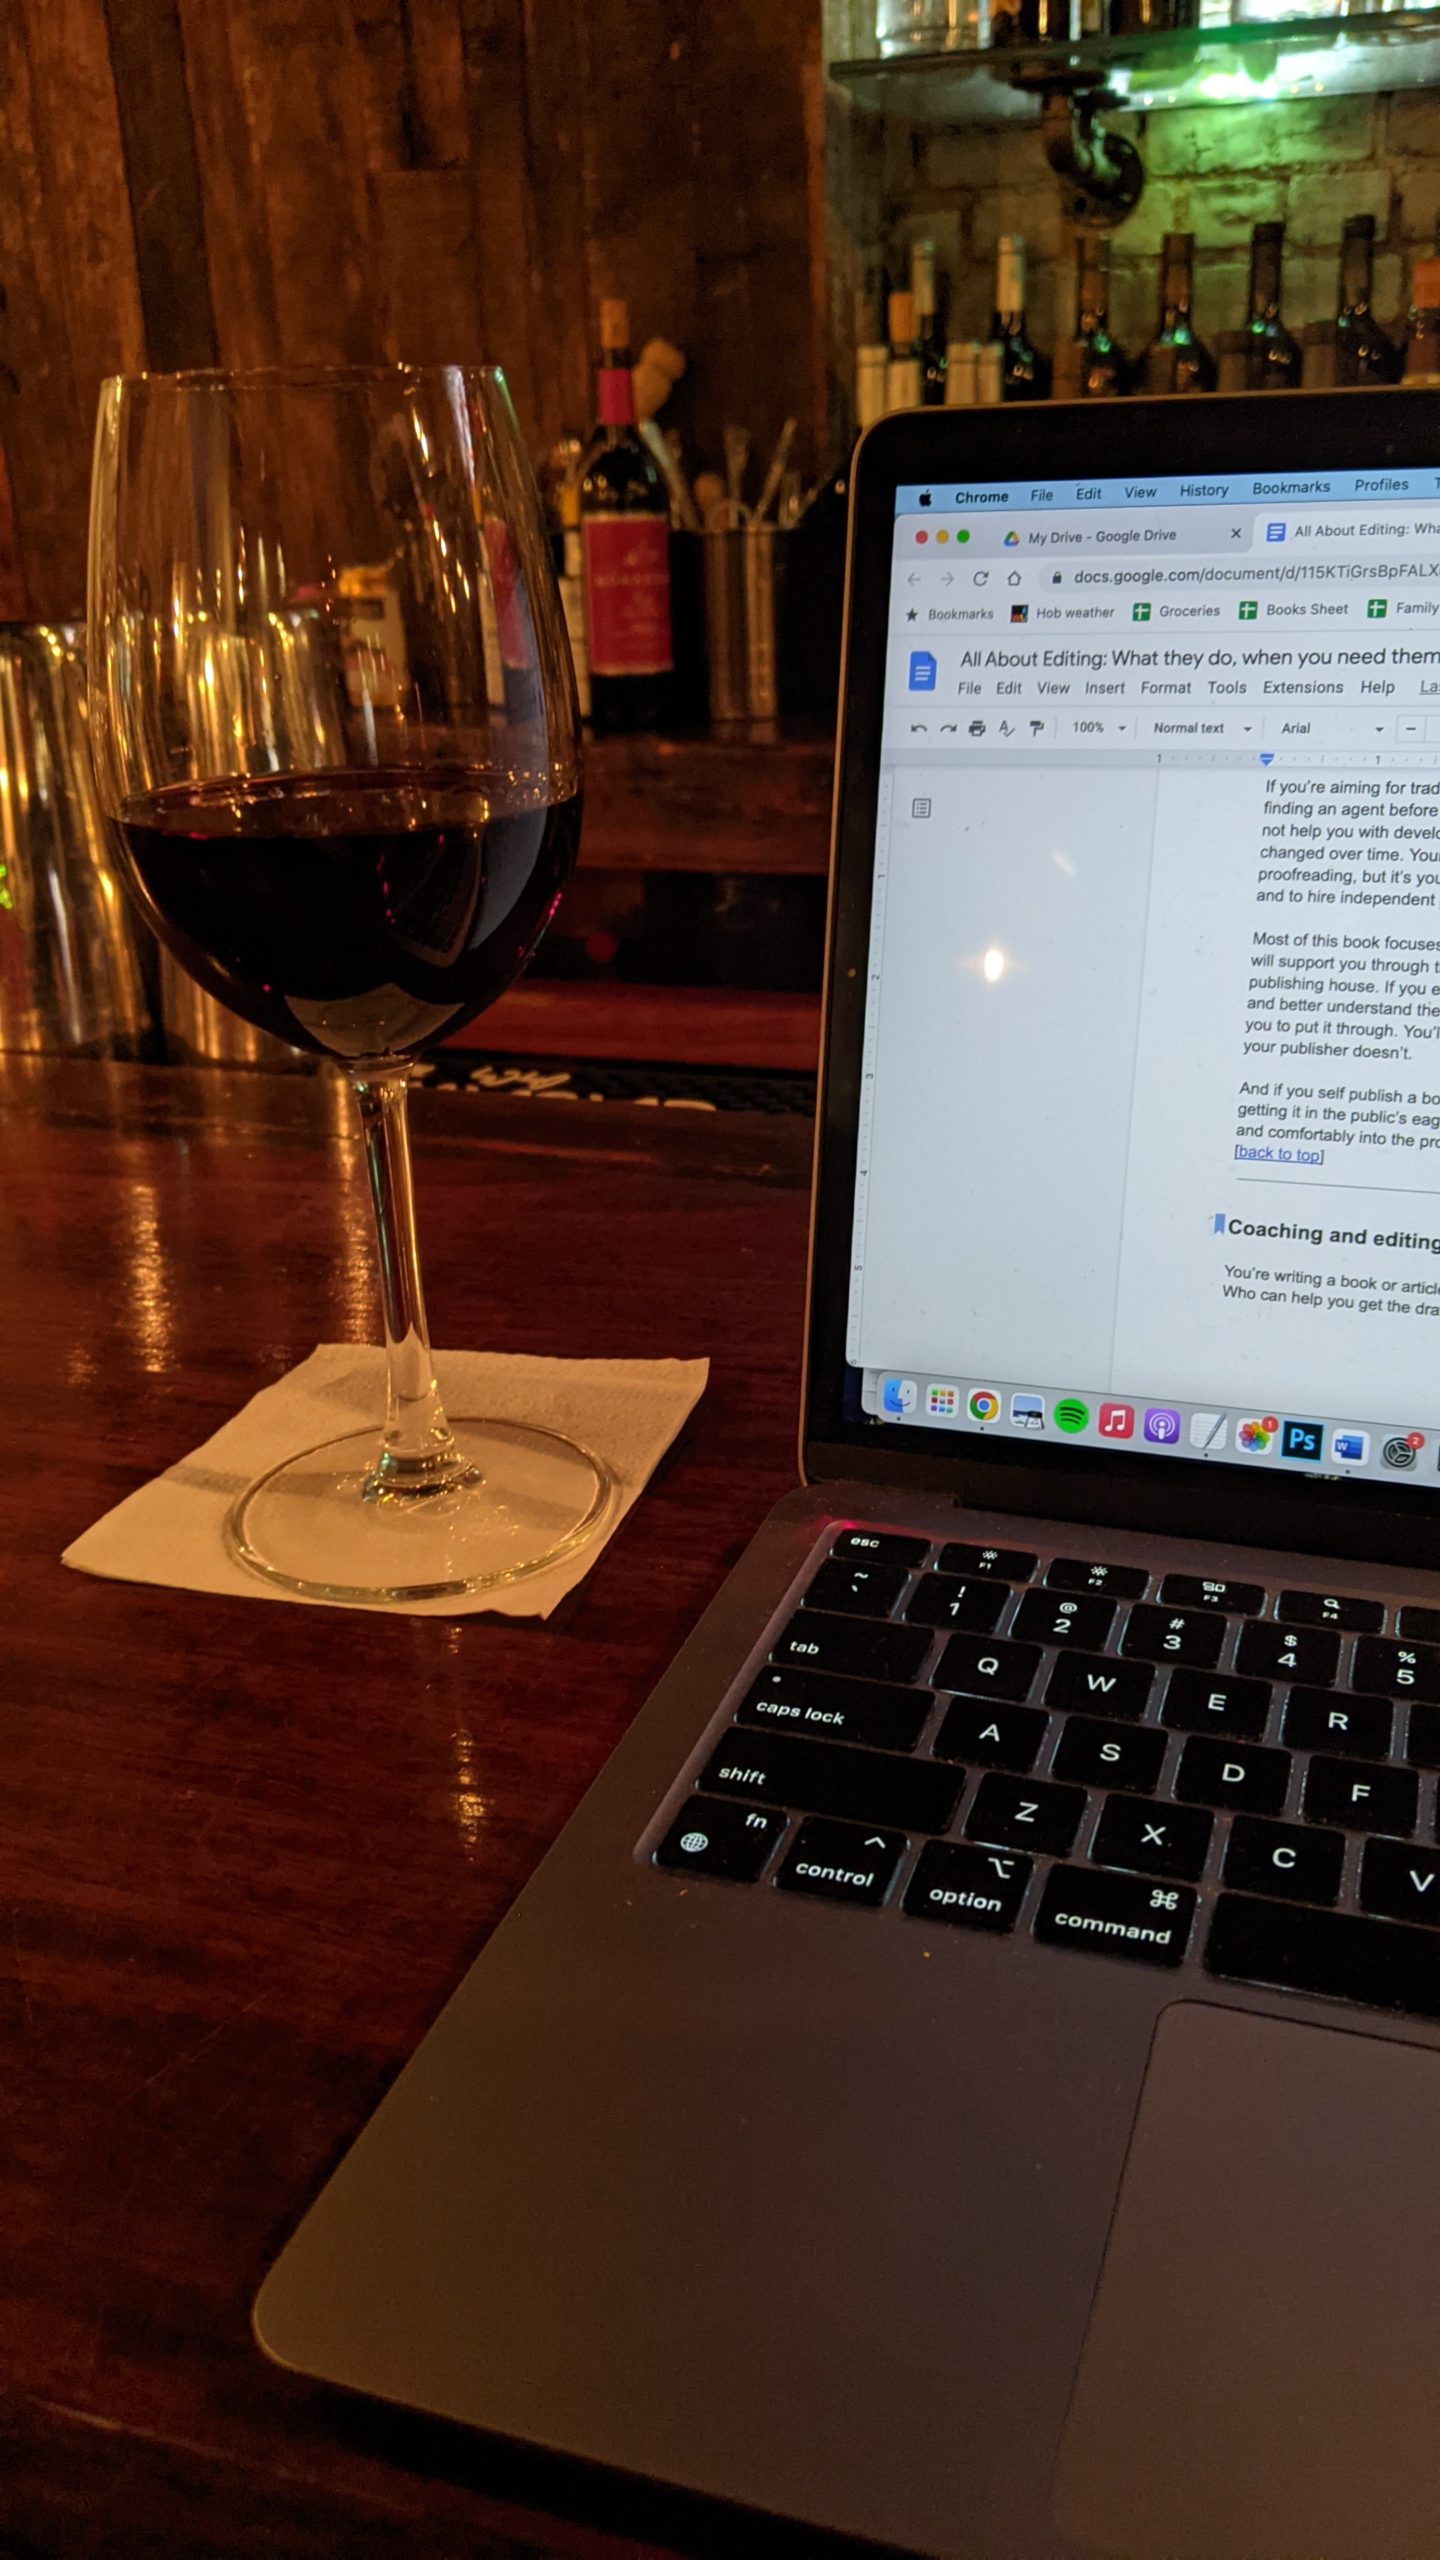 A glass of red wine over a small white paper napkin, next to the edge of a laptop, on a dark wood bar. Wine bottles and lights are out of focus in the background.